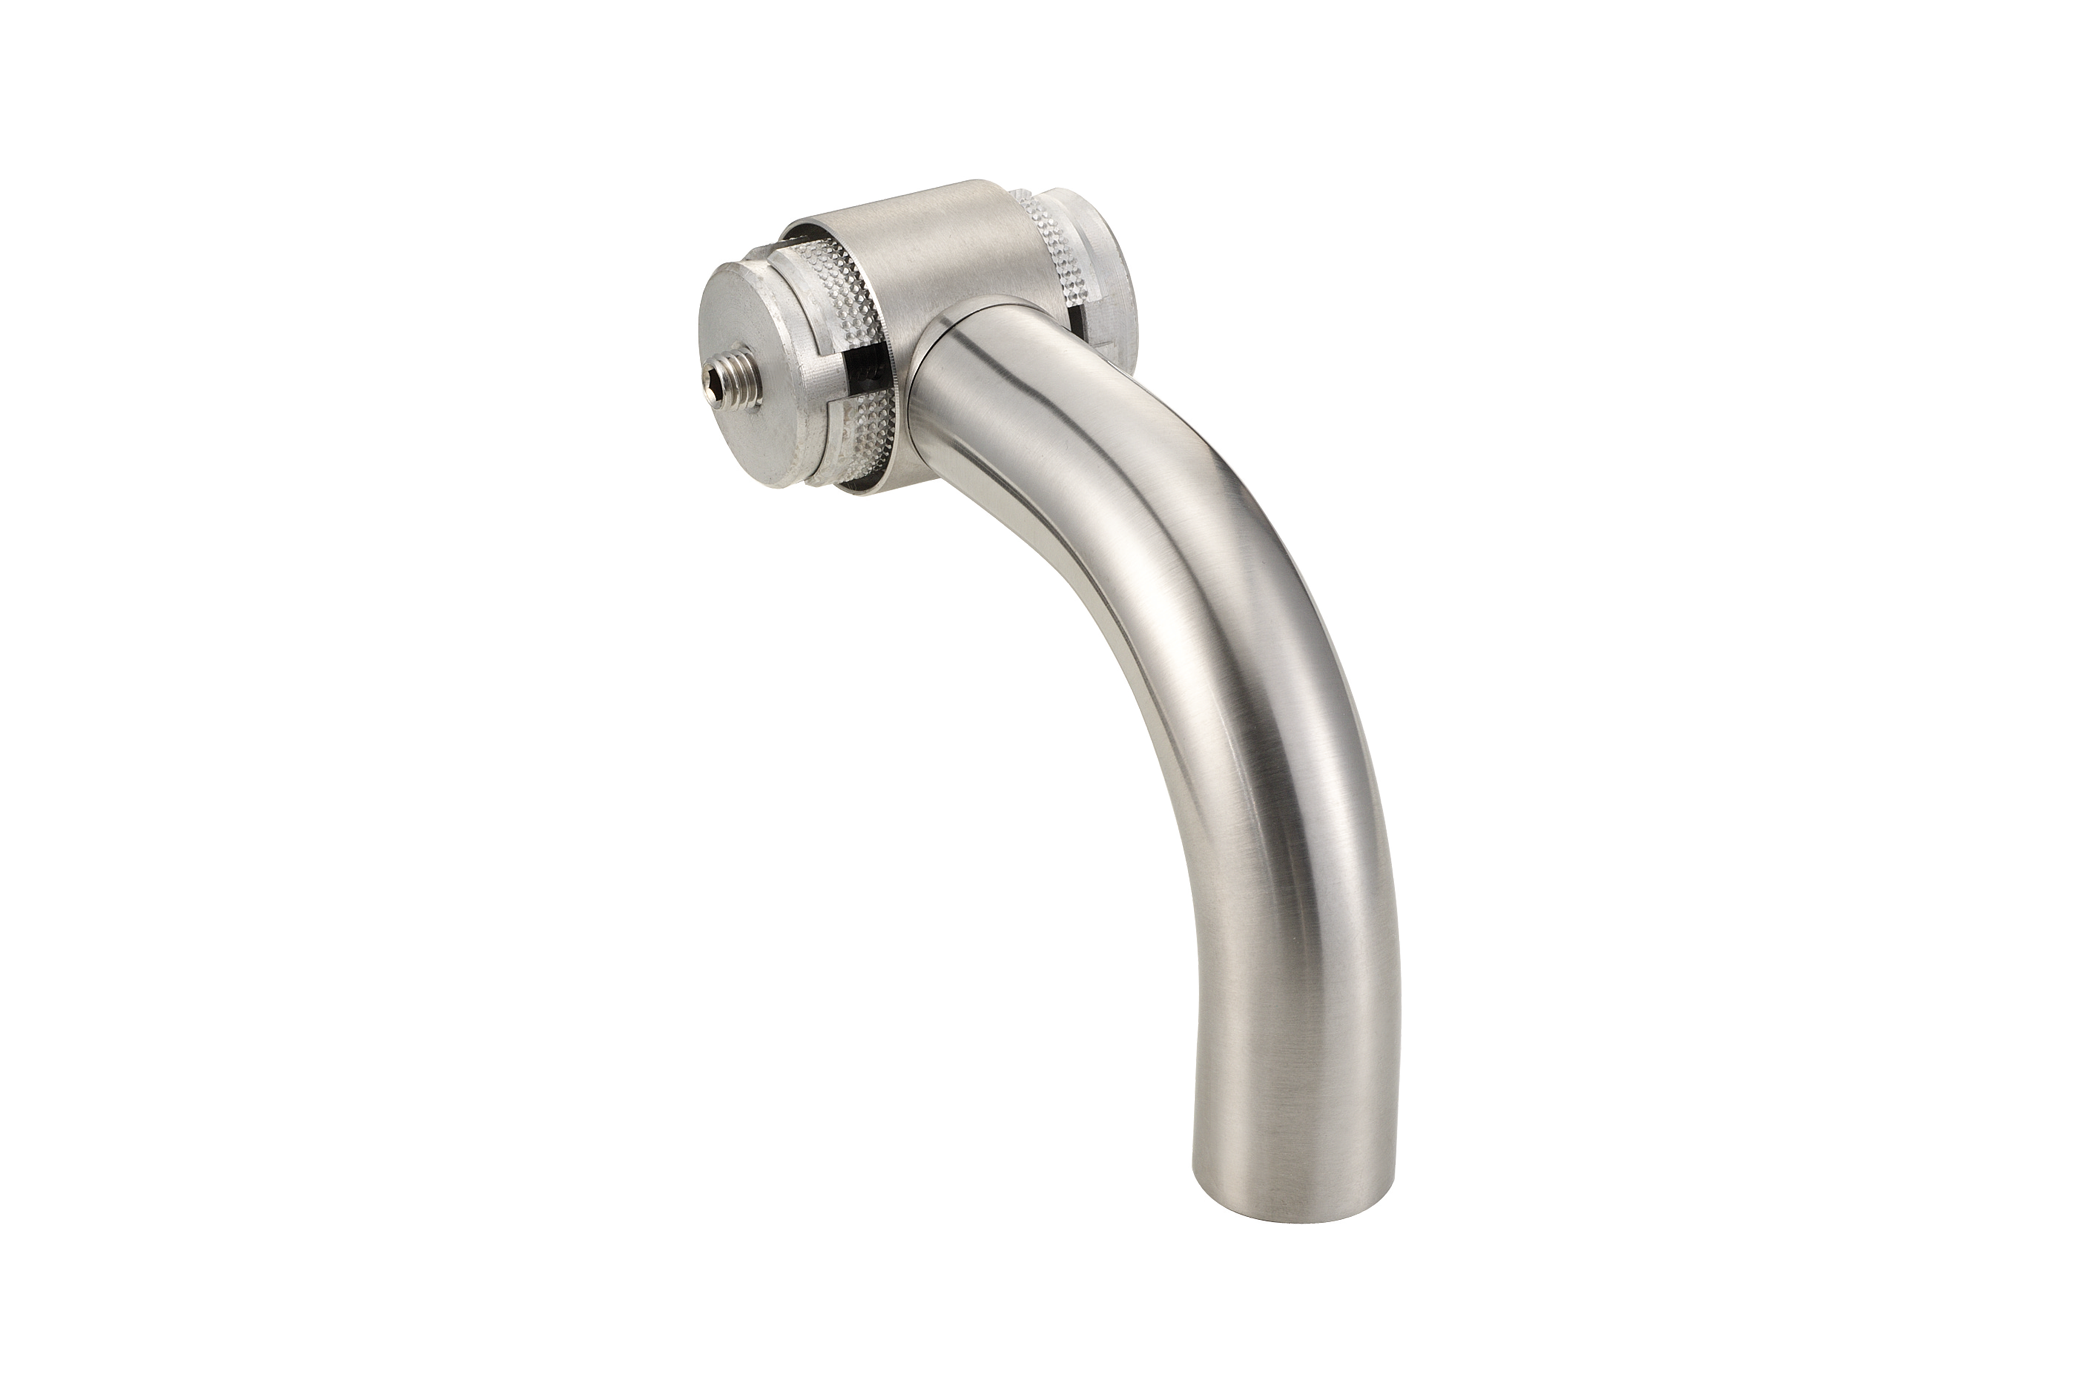 KWS Mid support 8341 in finish 82 (stainless steel, matte)